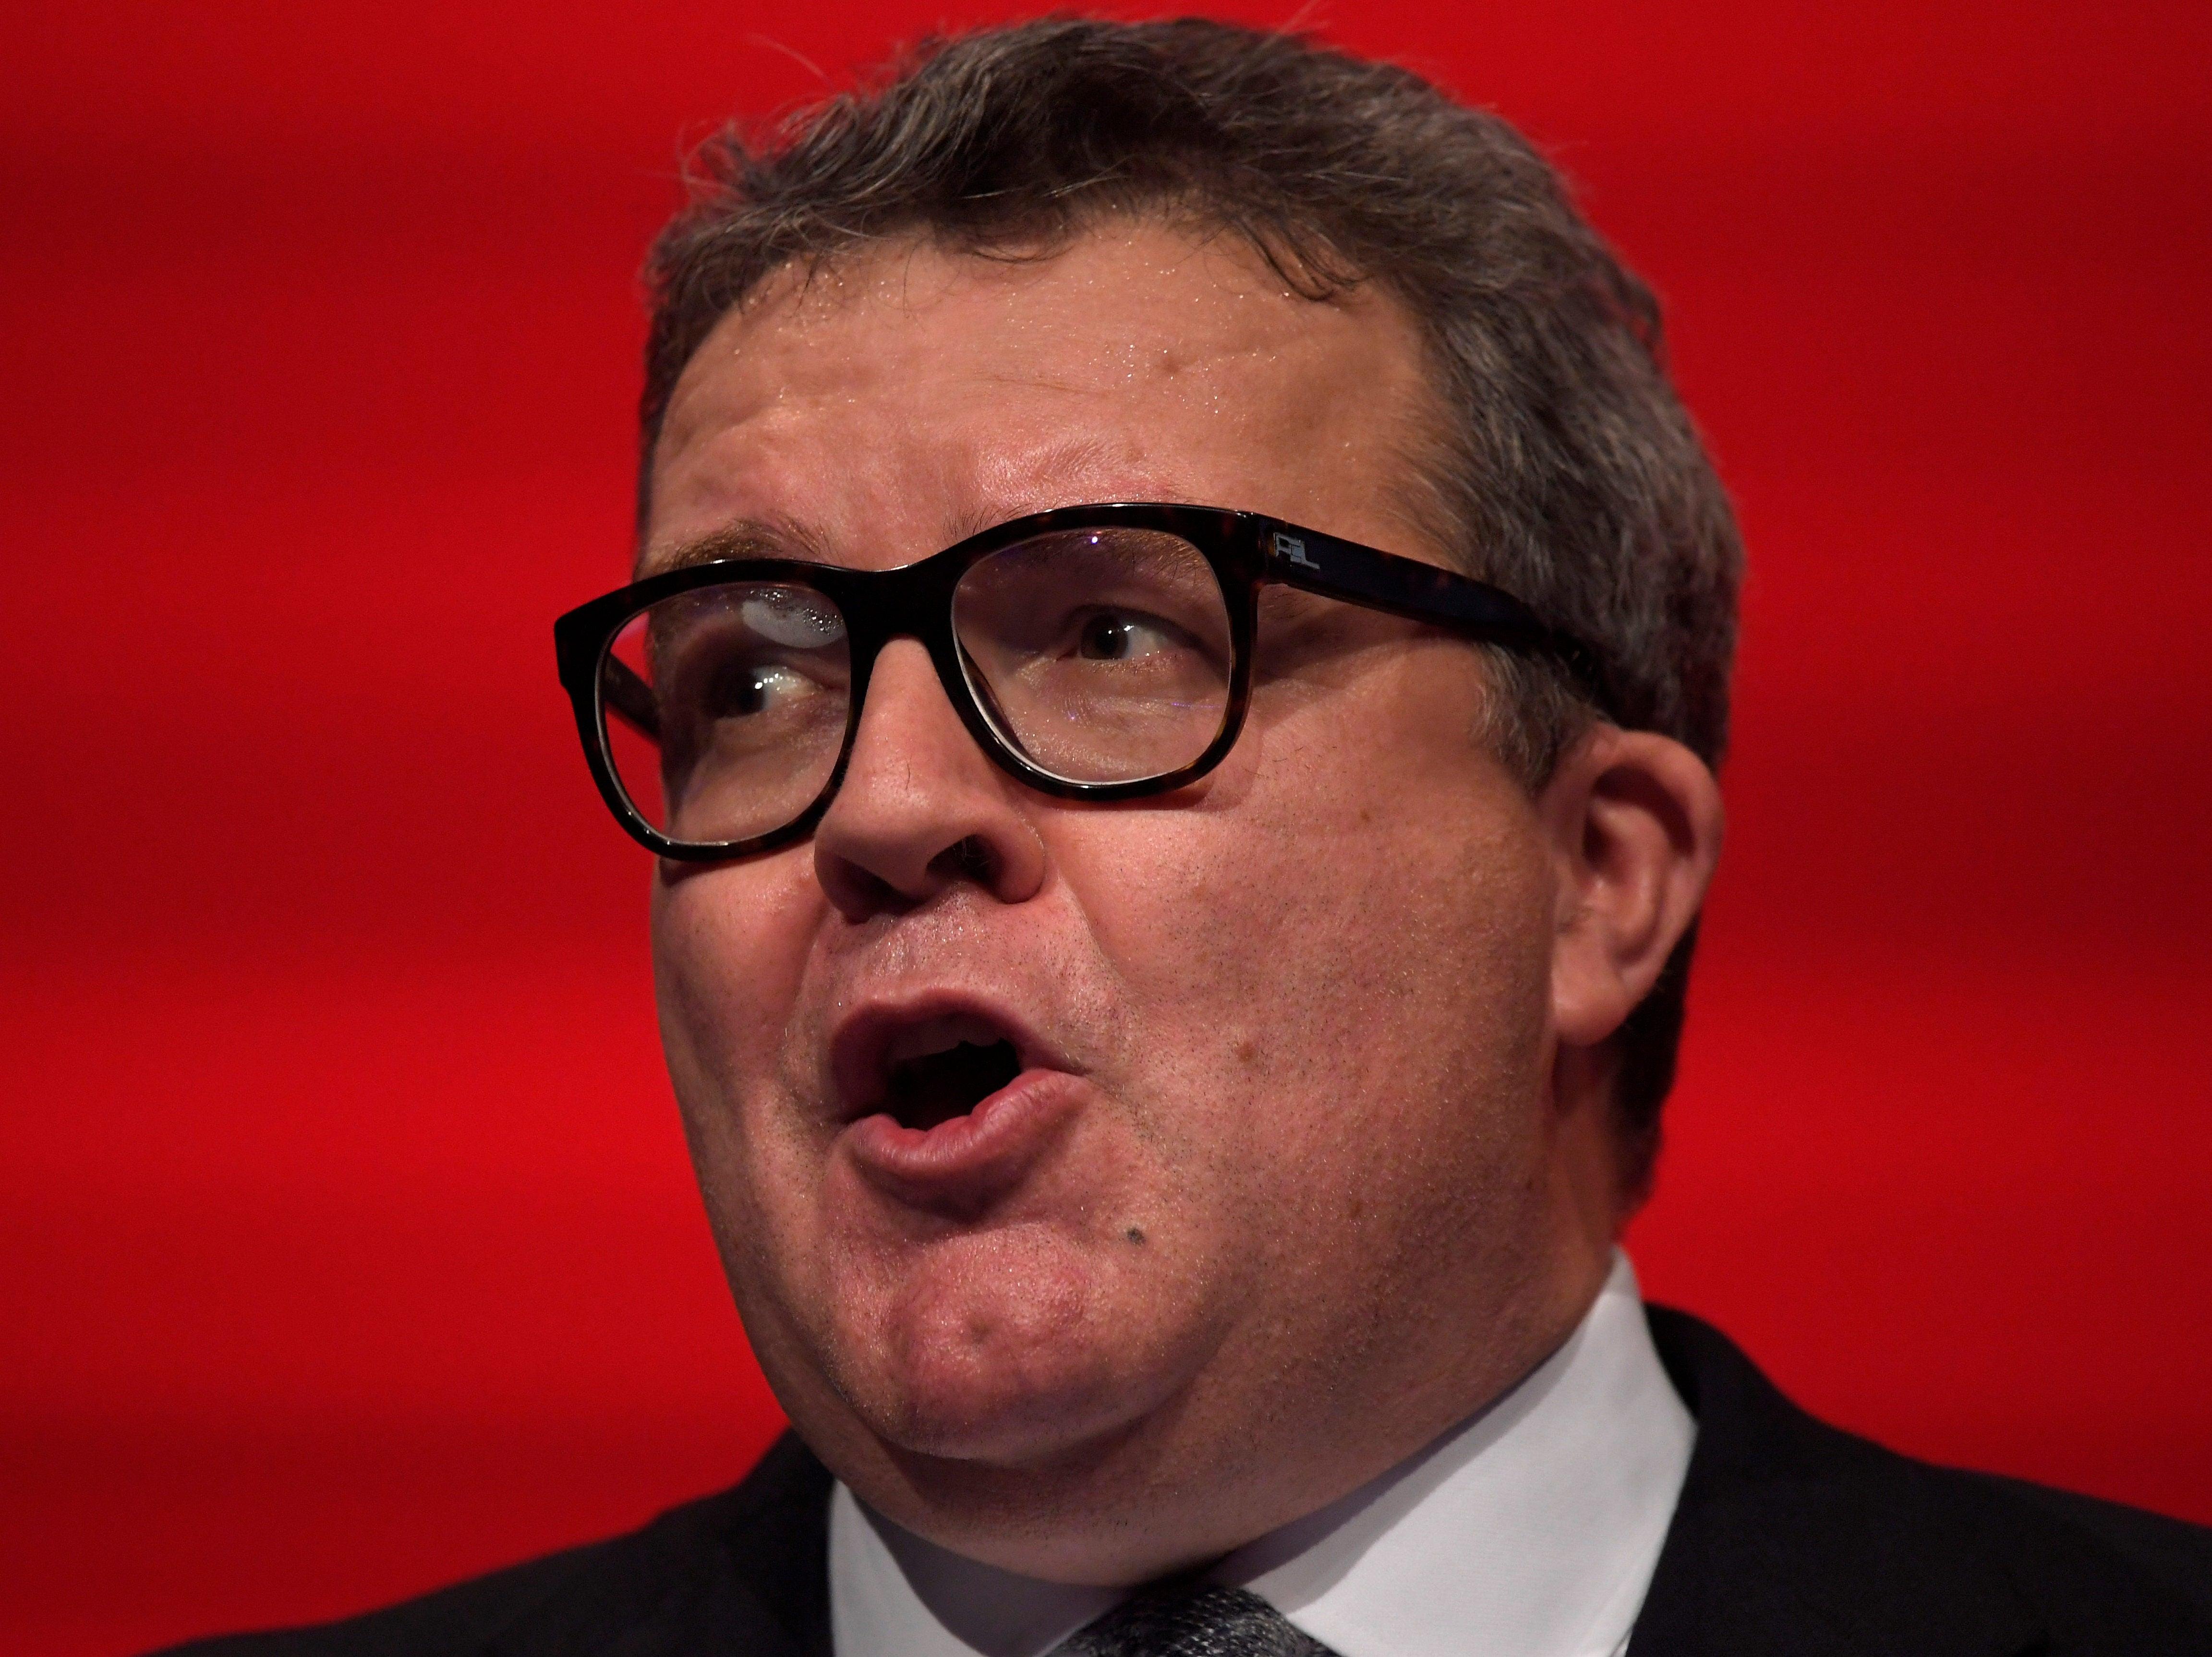 'We don't want to replace Murdoch with Zuckerberg' says Tom Watson in call for better regulation of online giants